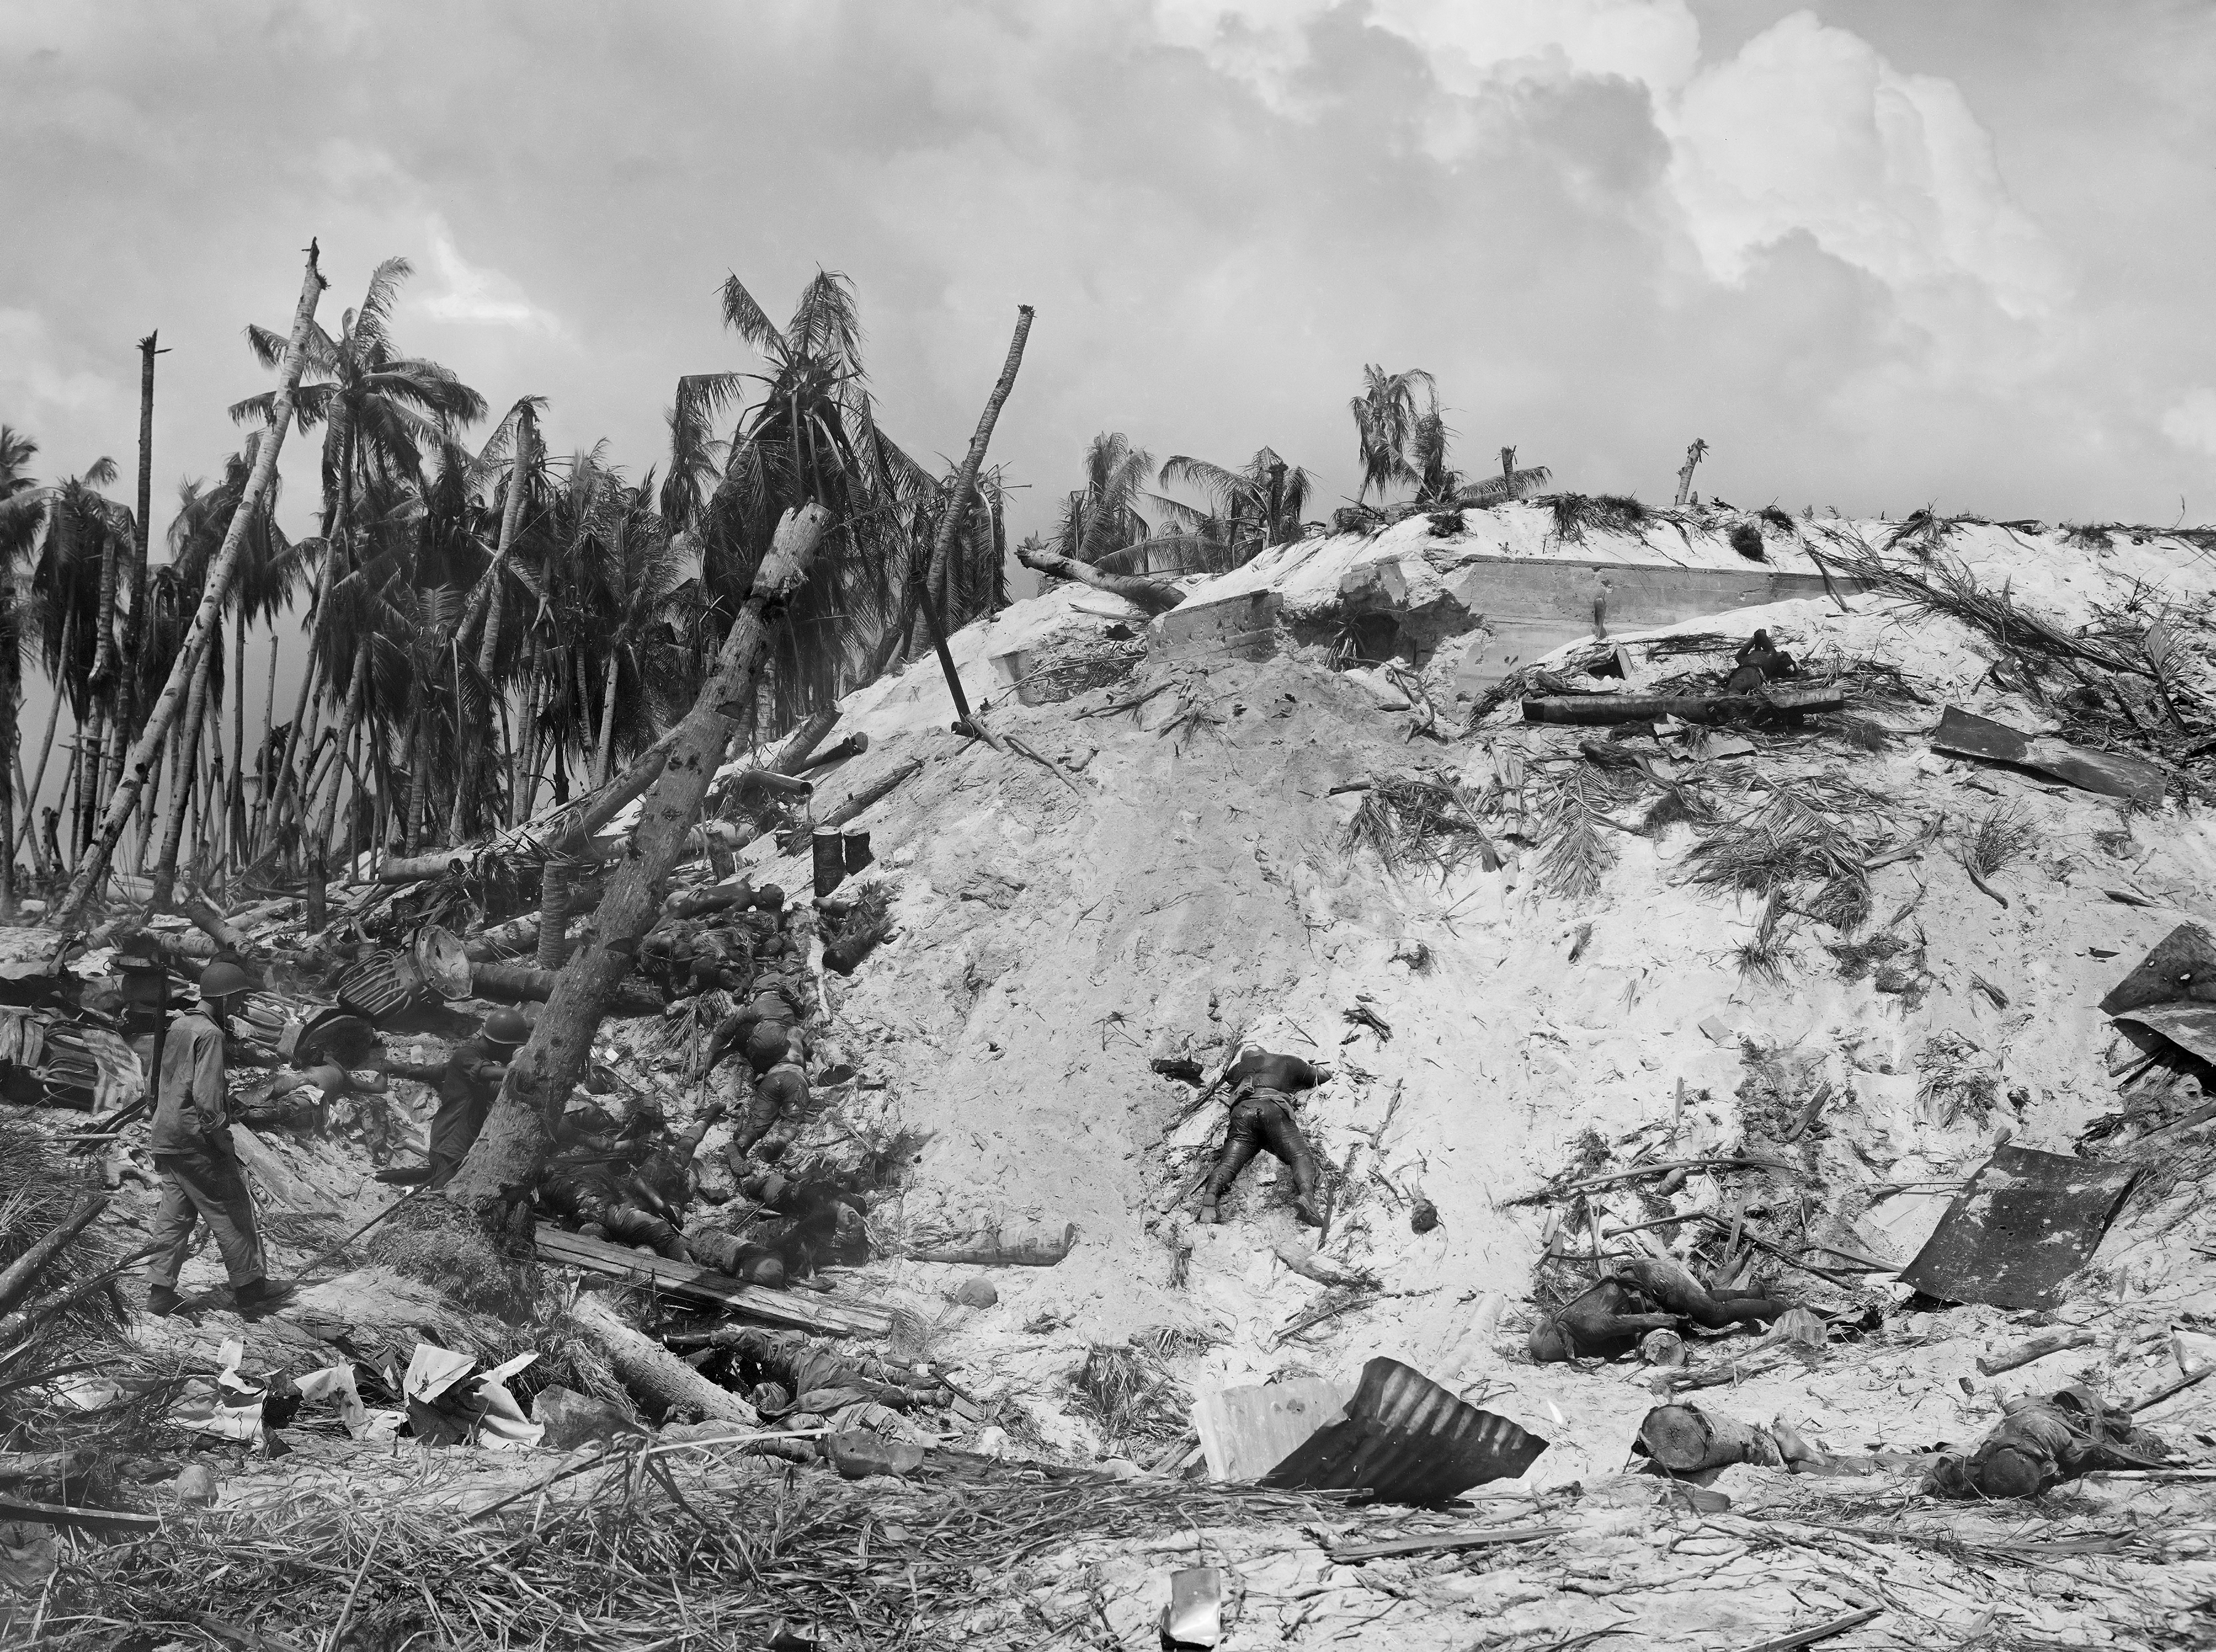 Dead Japanese soldiers lay scattered around a blasted Japanese pillbox on Tarawa Atoll in the Gilbert Islands of the South Pacific on Nov. 11, 1943 during World War II. (AP Photo/Frank Filan)